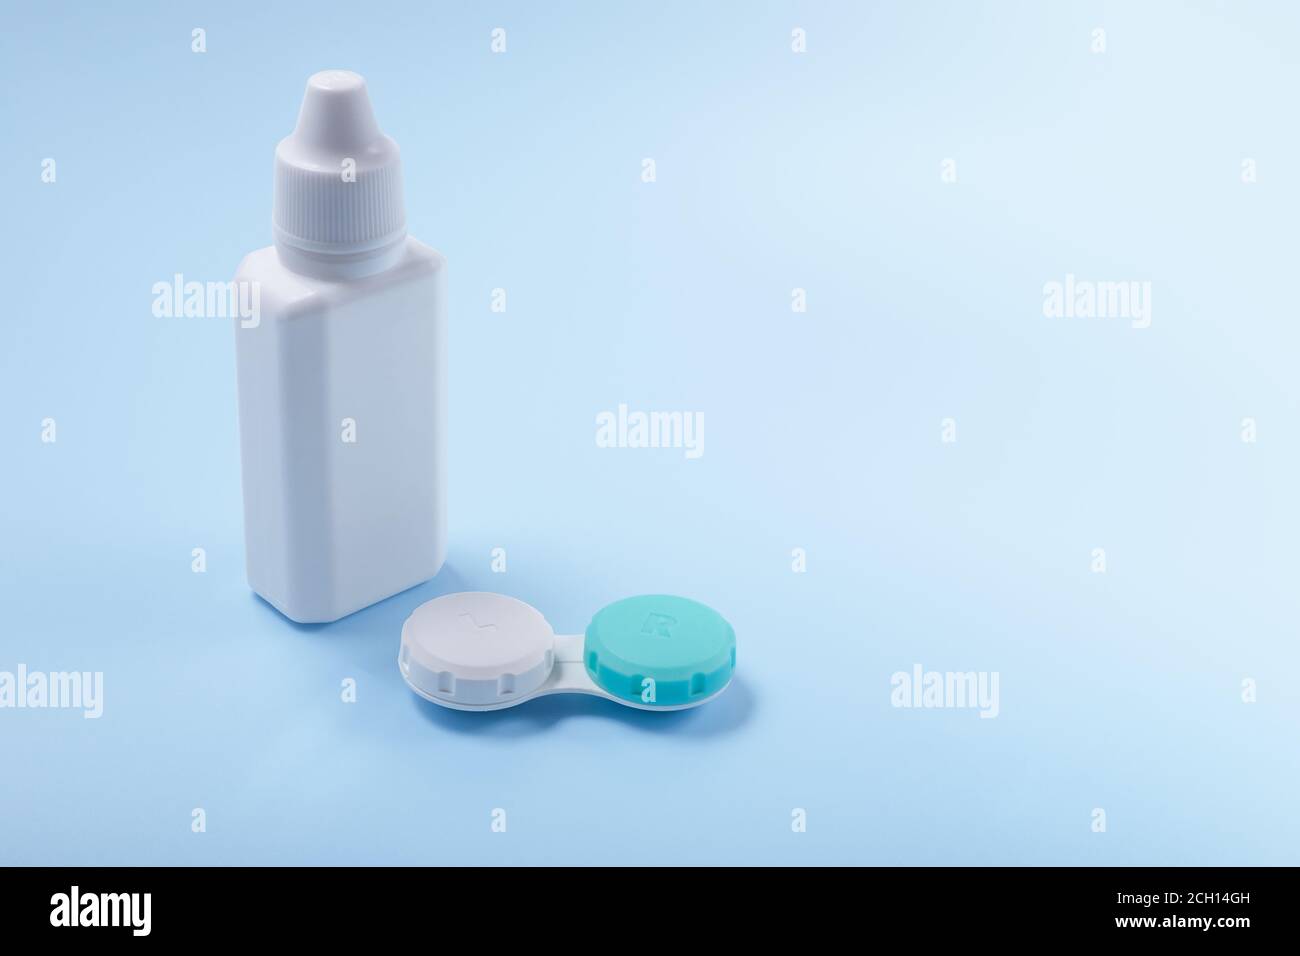 Contact lenses and lens liquid on a blue background. Bottle with lens solution and container for contact lenses. copyspace Stock Photo